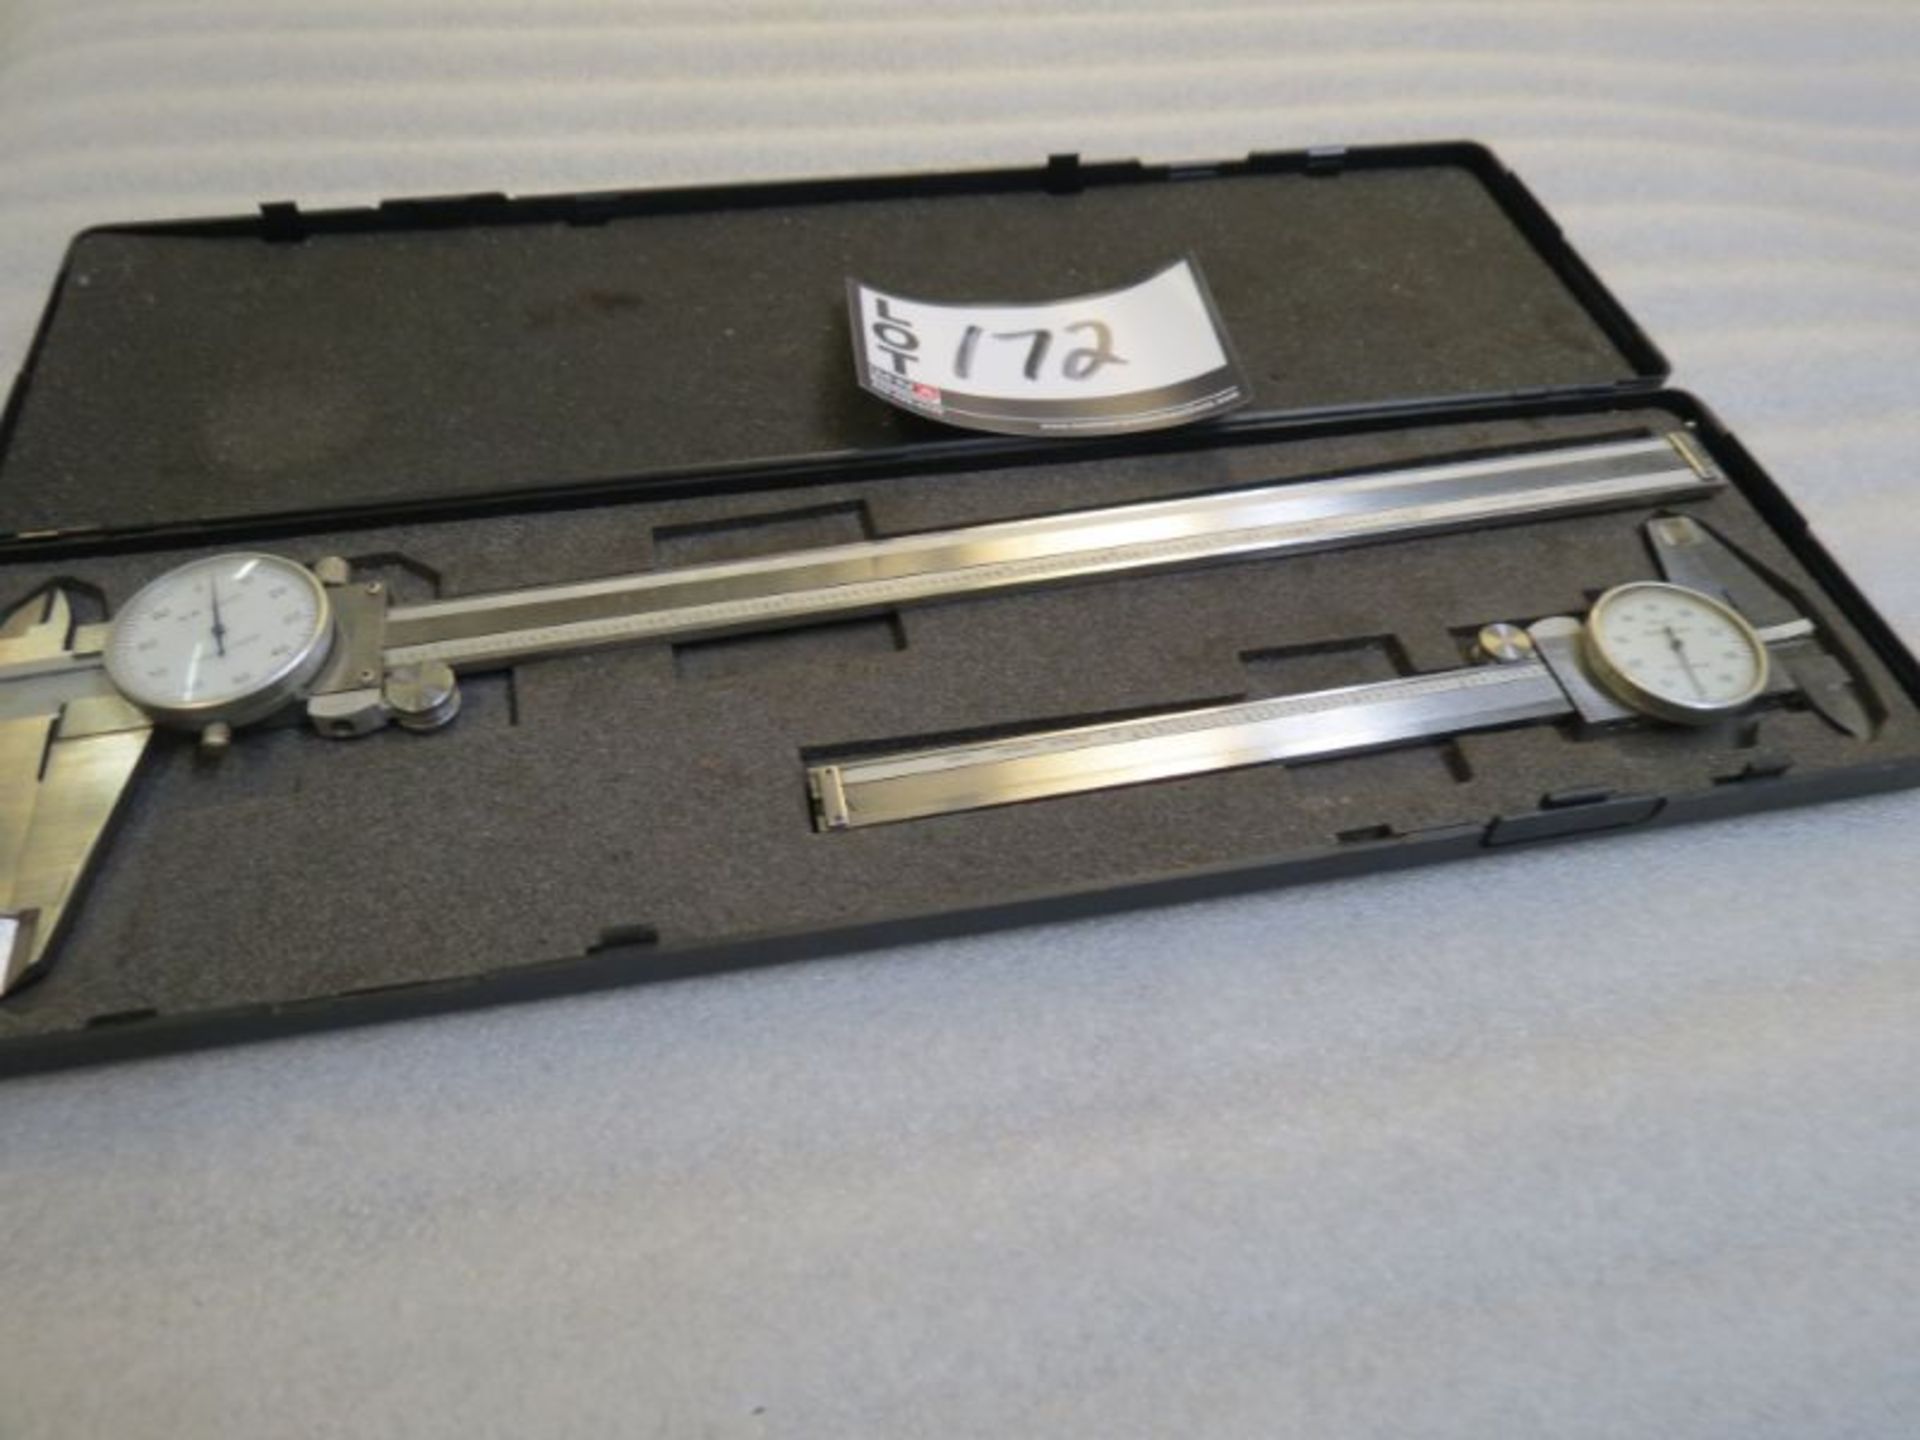 Set of 6" & 12" Dial Calipers - Image 4 of 4